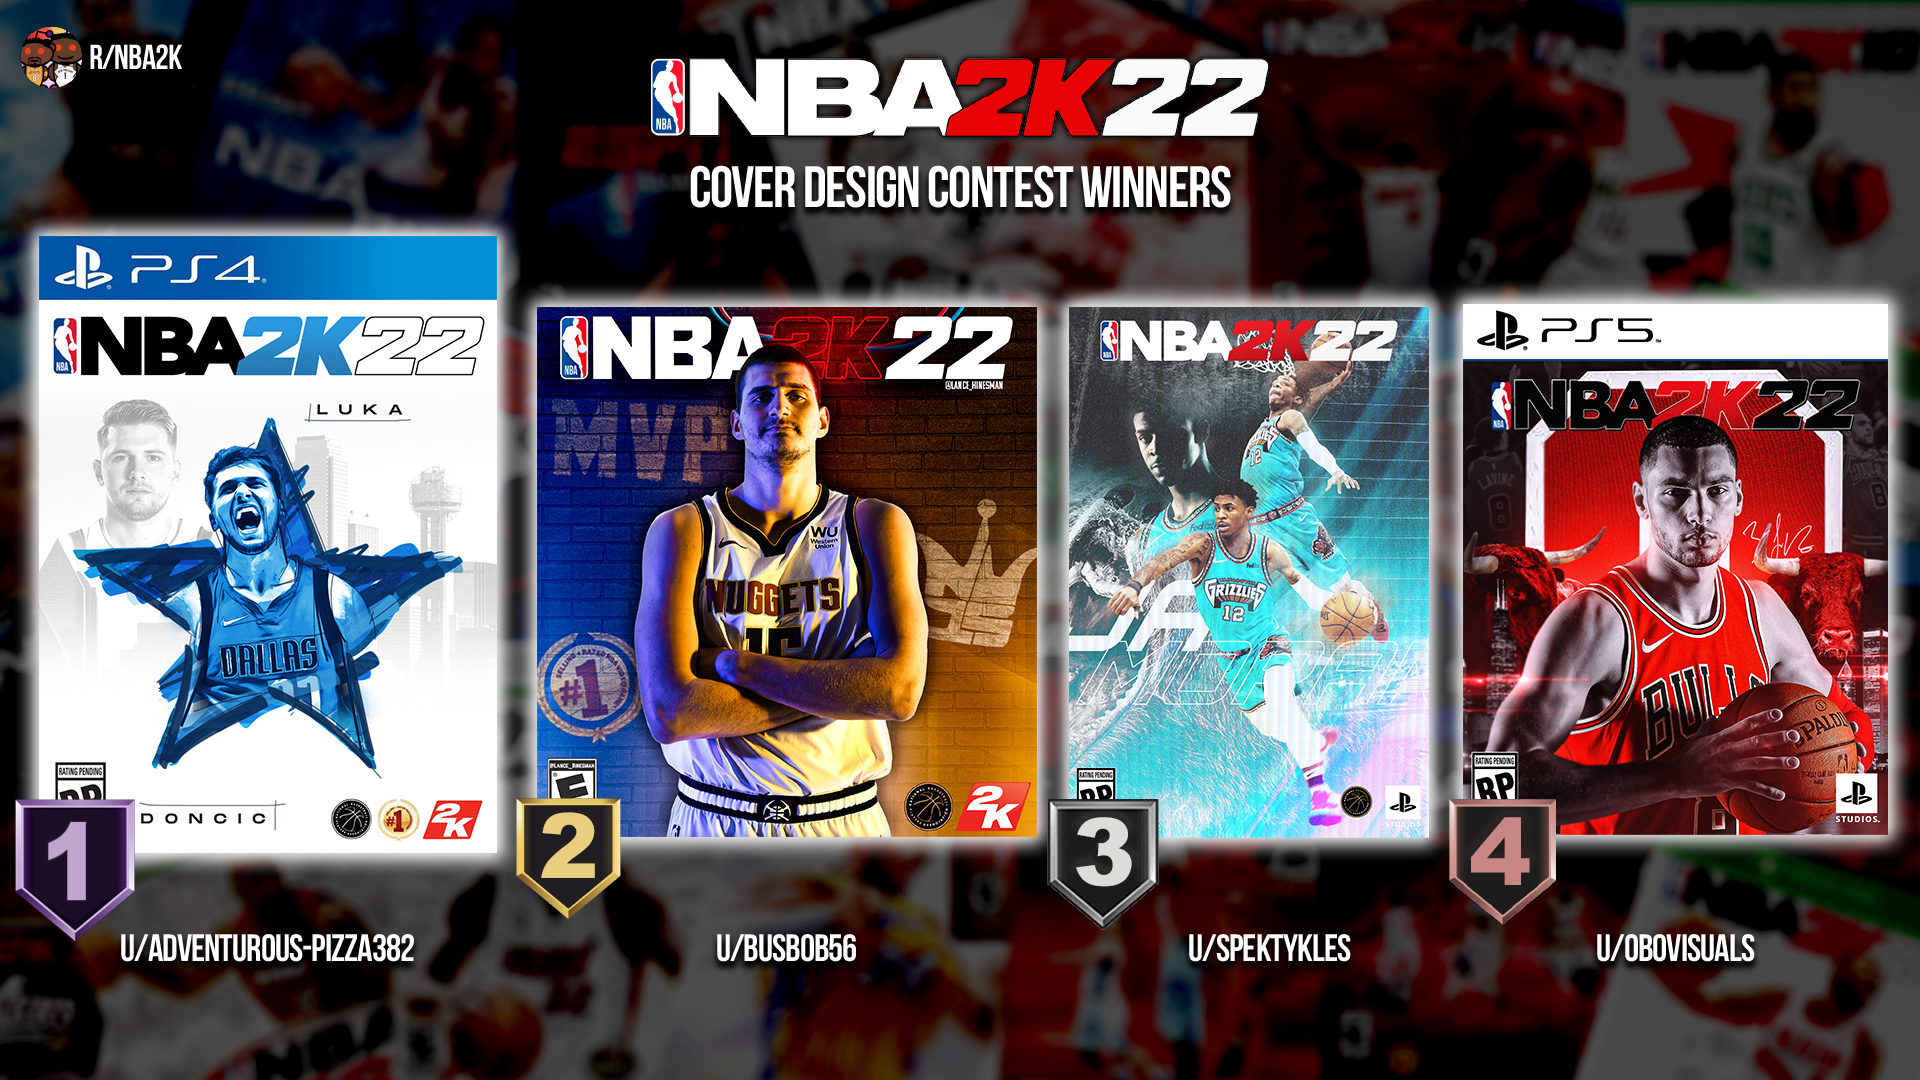 Congratulations to our 2K22 Cover Design Contest winners!: NBA2k